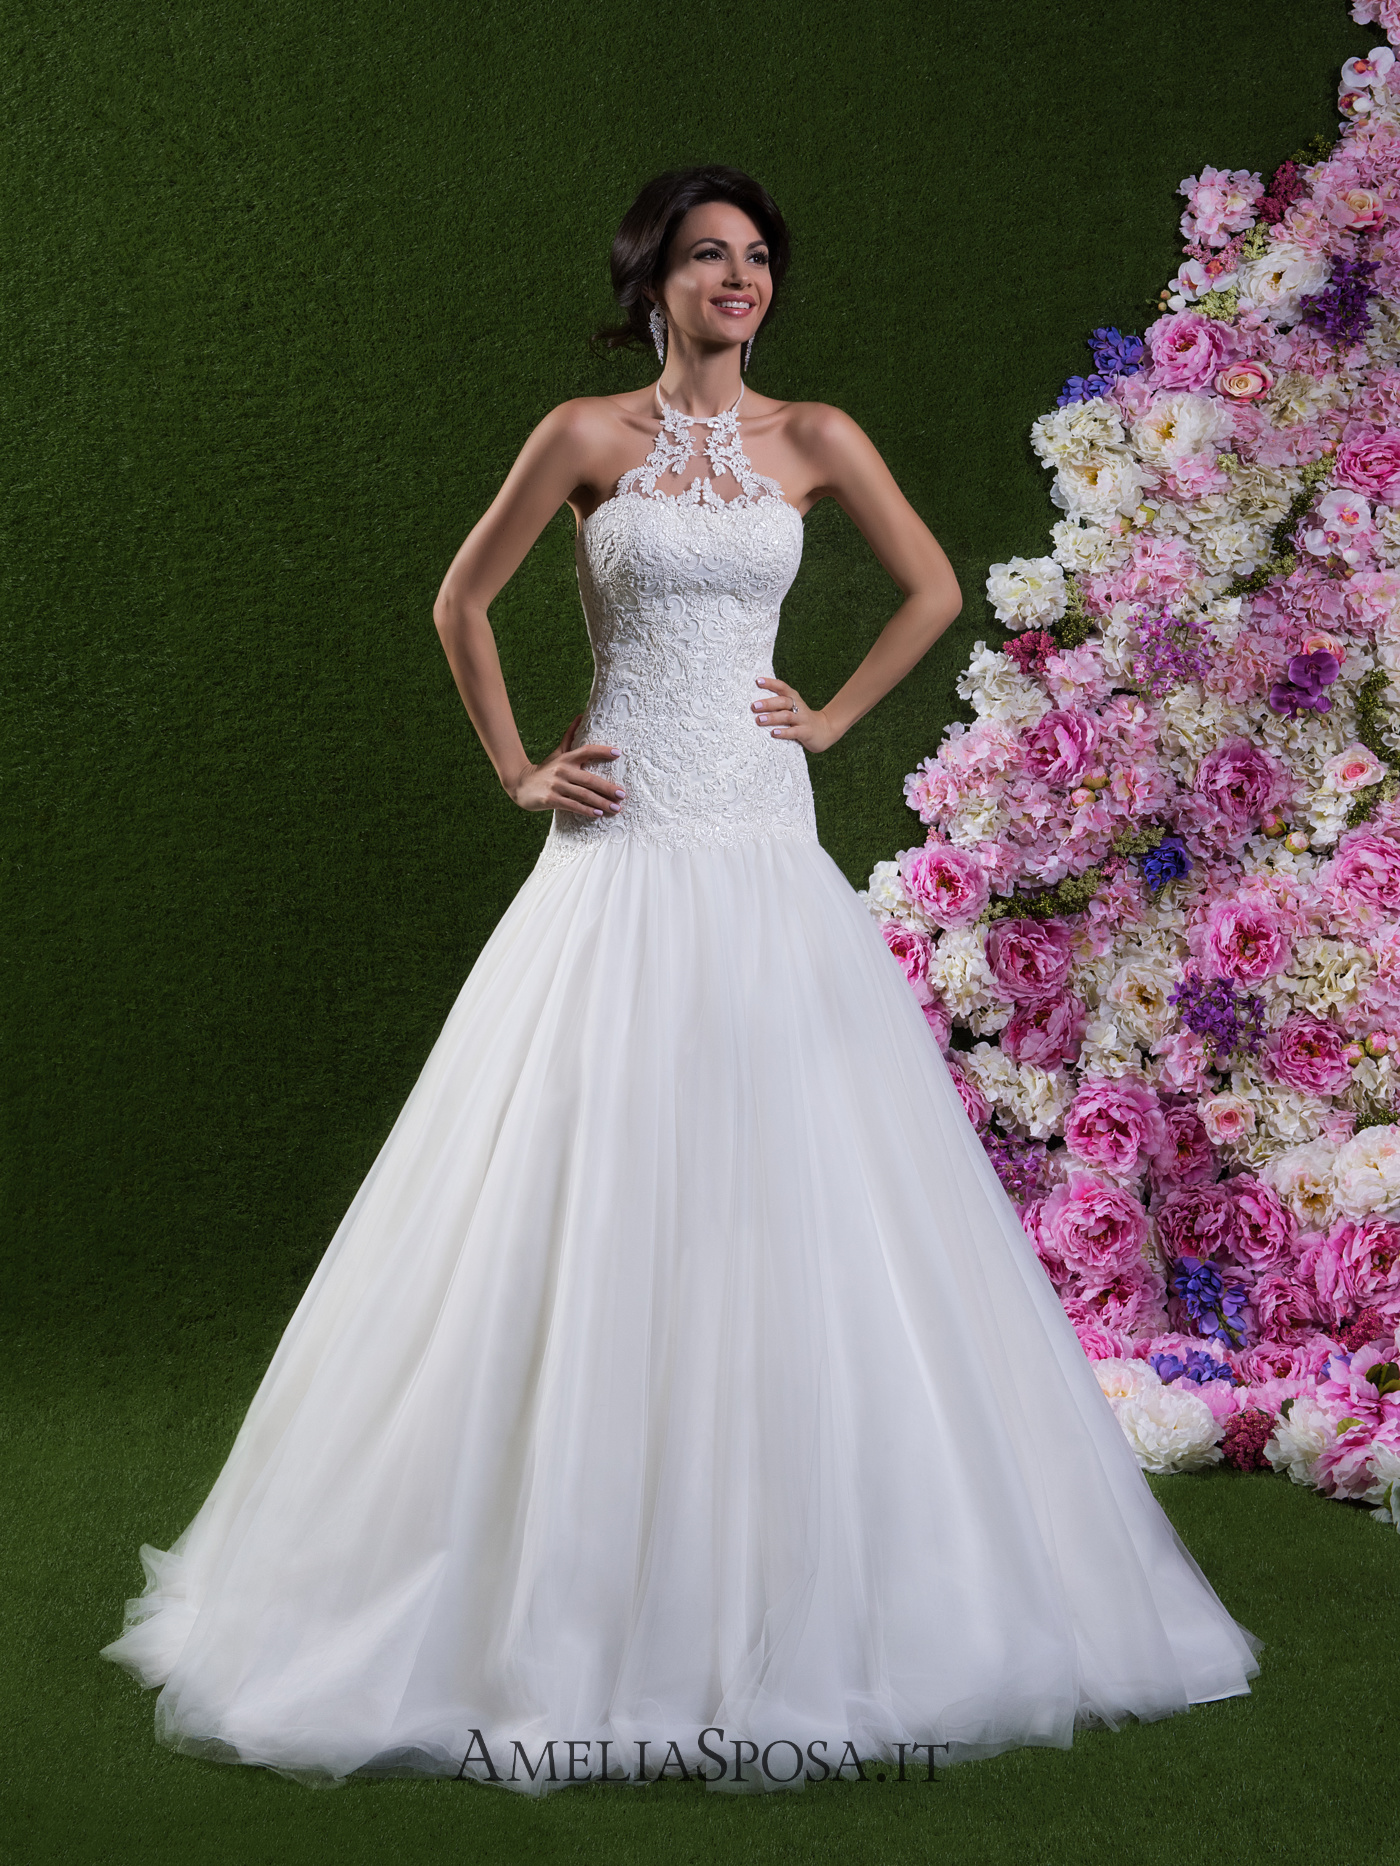 Gorgeous And Elegant Wedding Dress Collection By Amelia Sposa